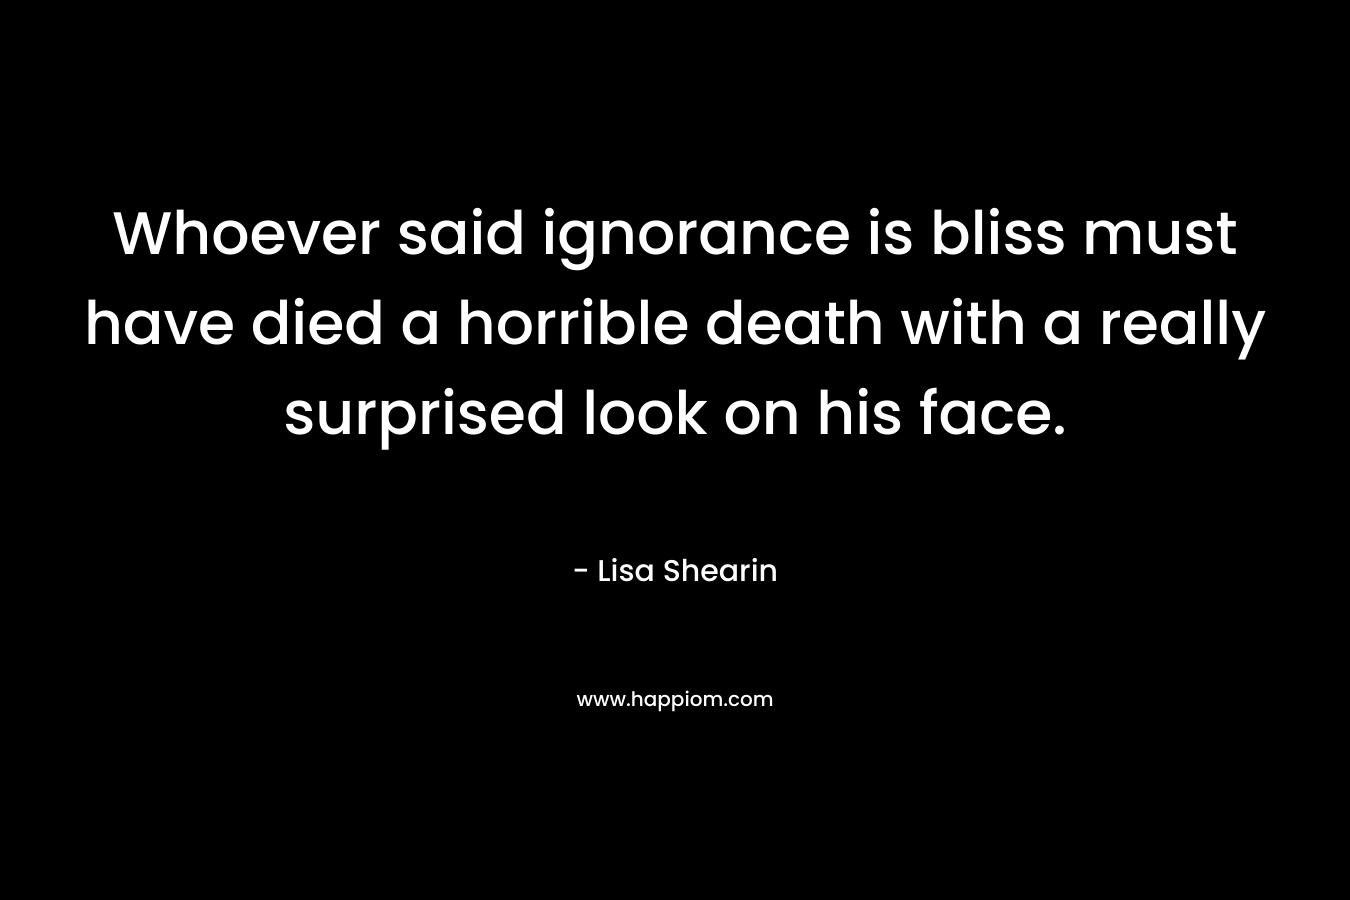 Whoever said ignorance is bliss must have died a horrible death with a really surprised look on his face. – Lisa Shearin